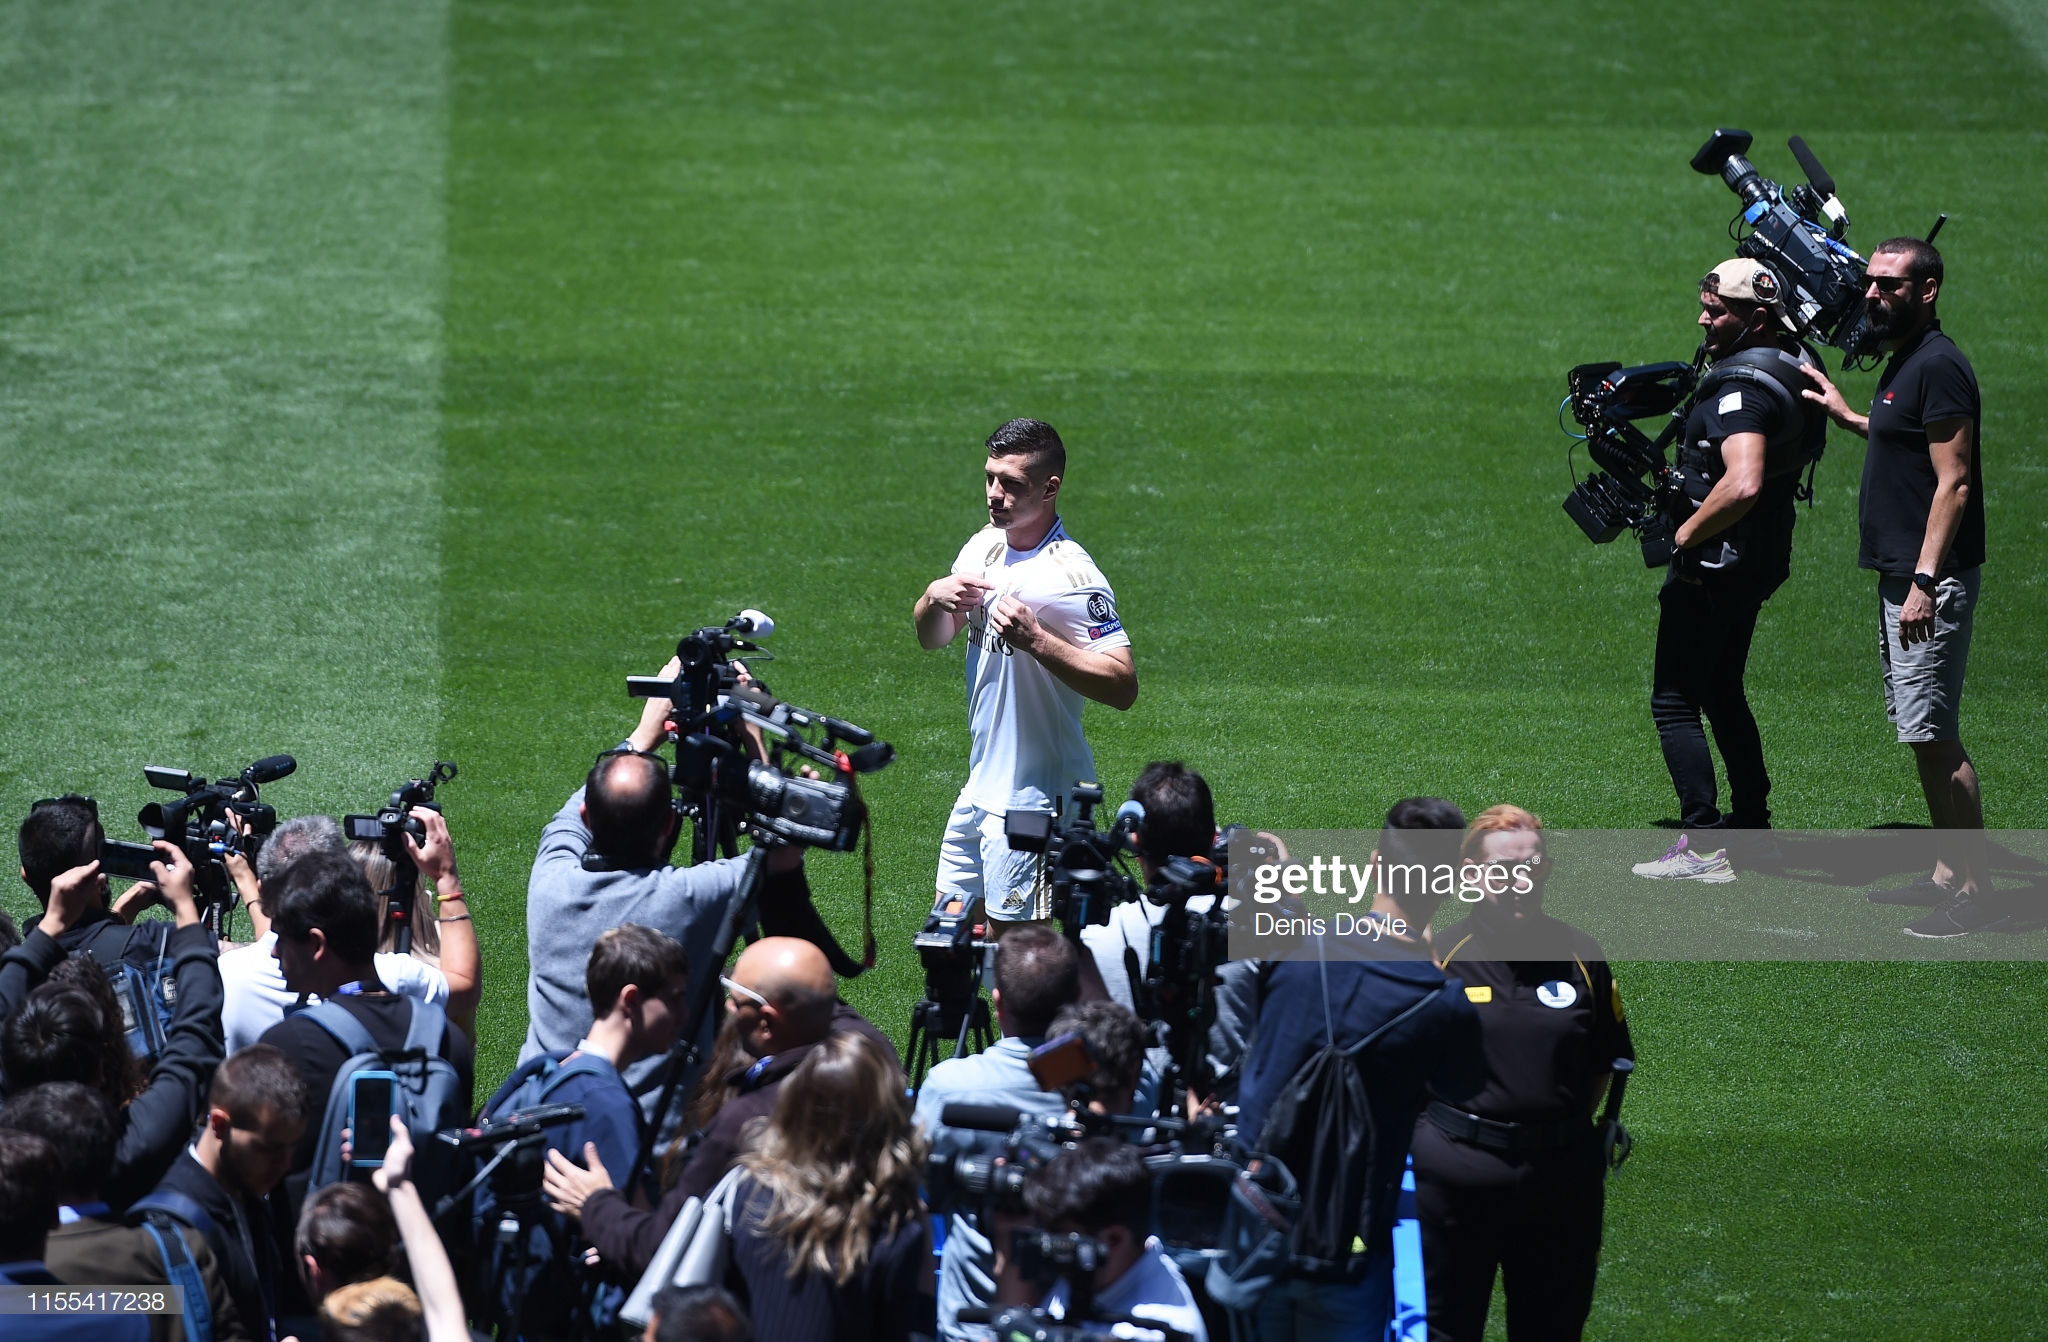 gettyimages-1155417238-2048x2048.jpg